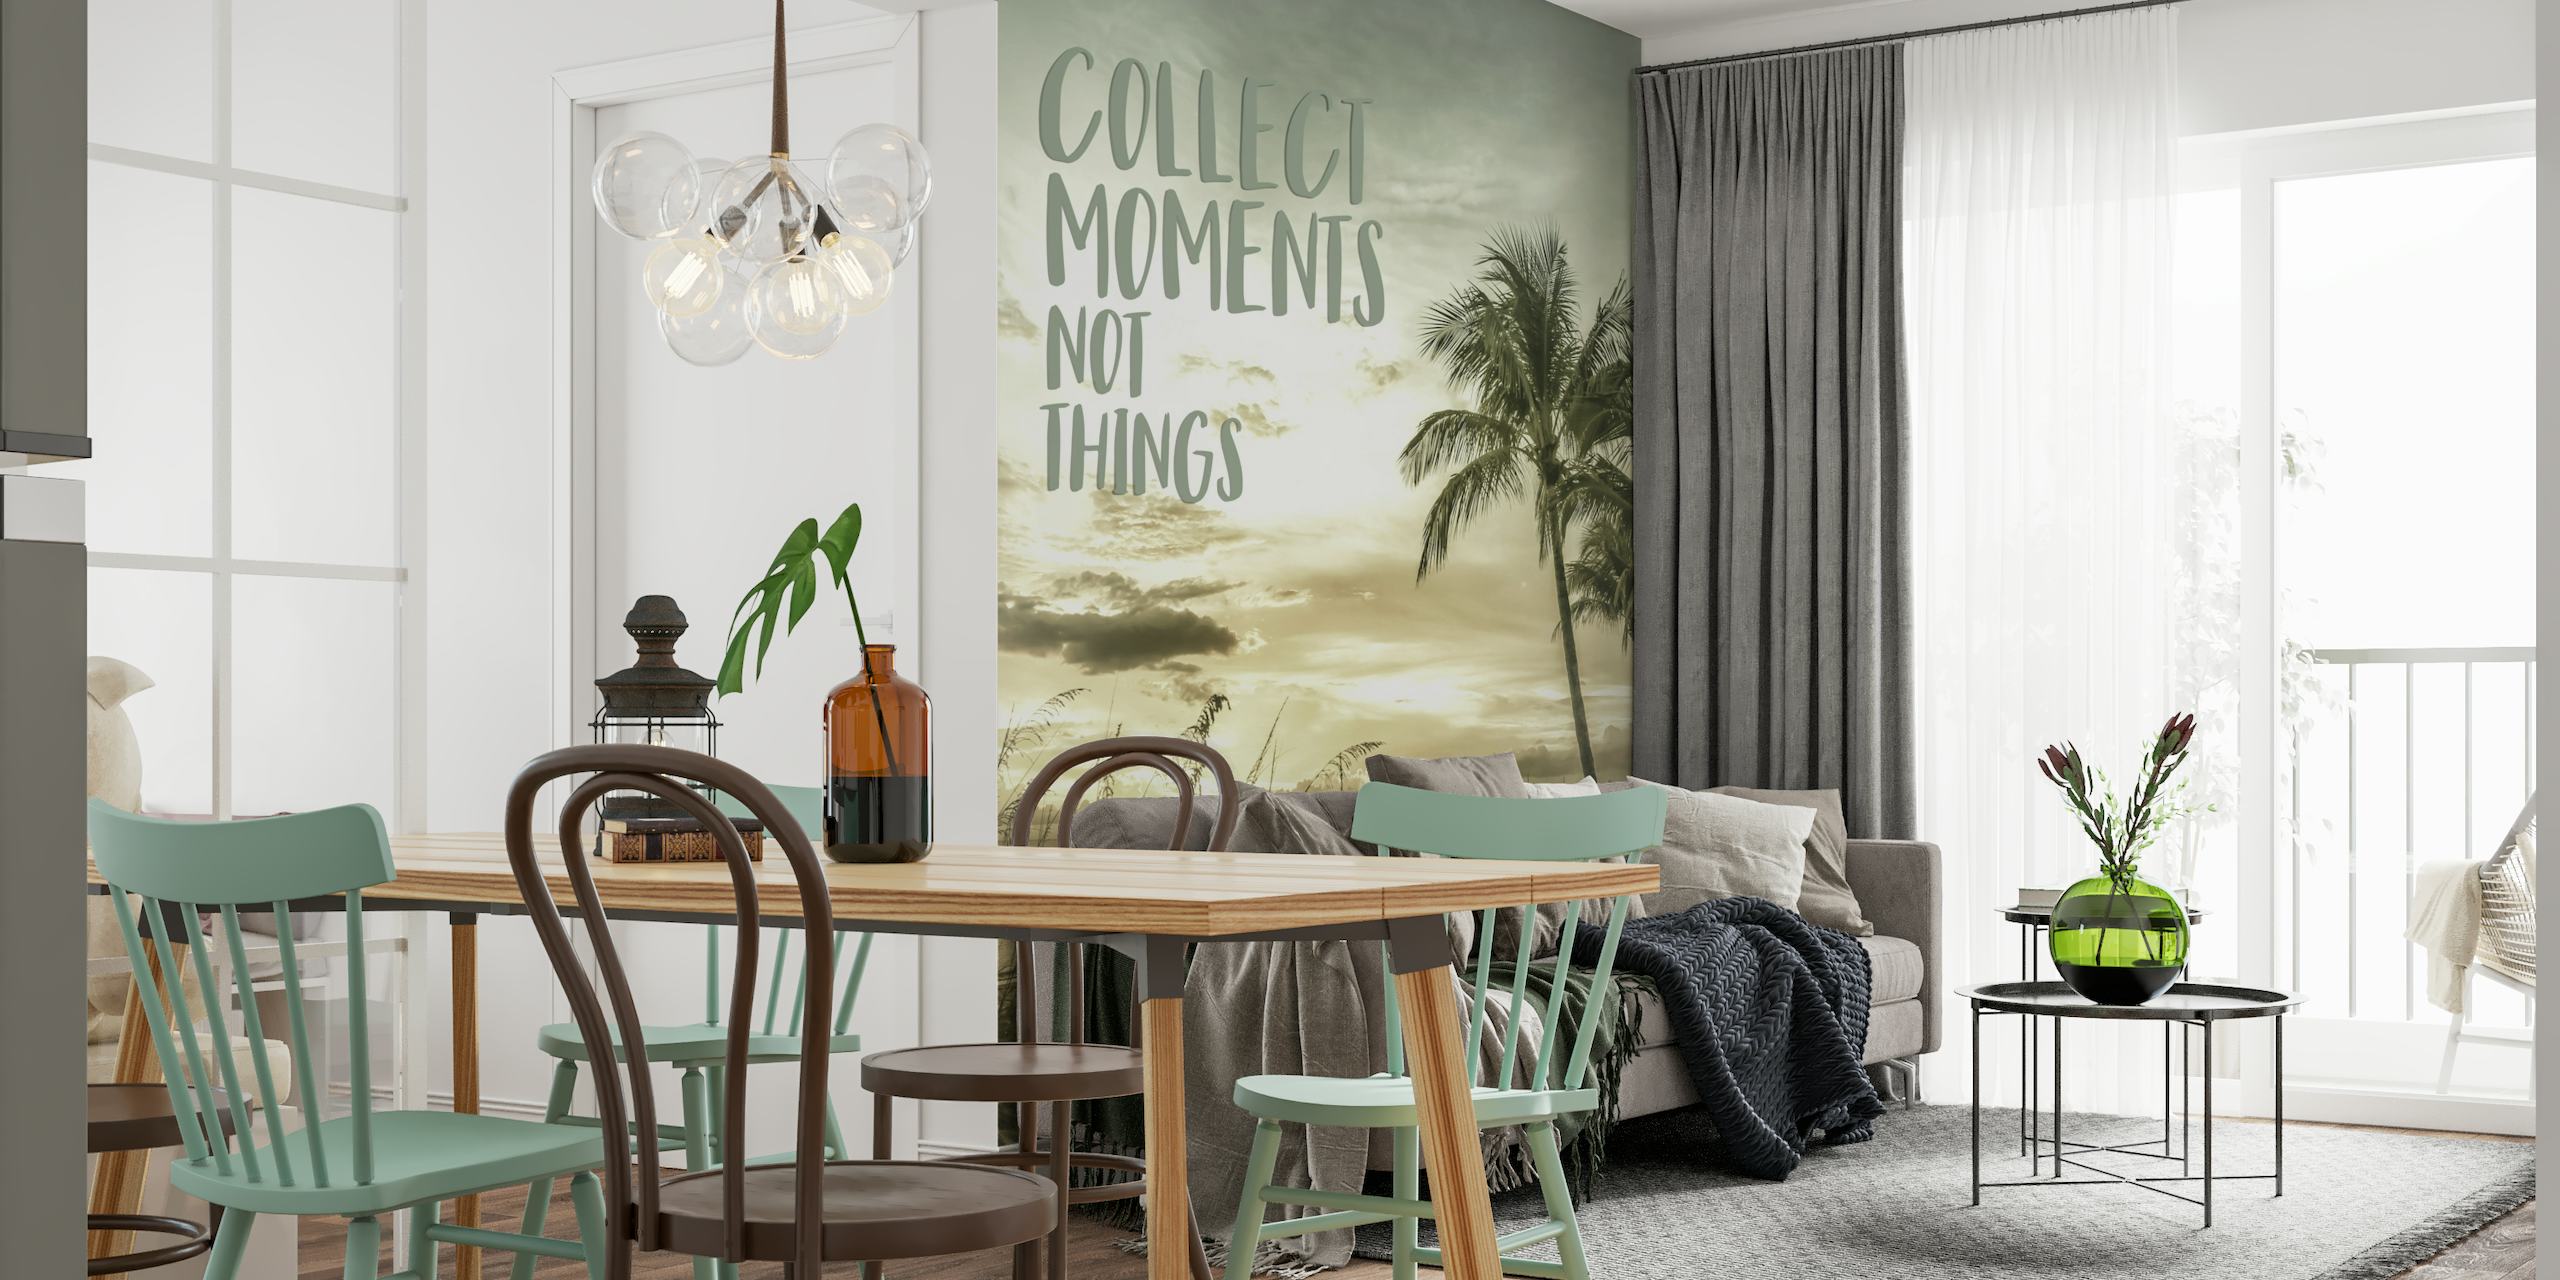 Collect moments not things | Sunset tapety